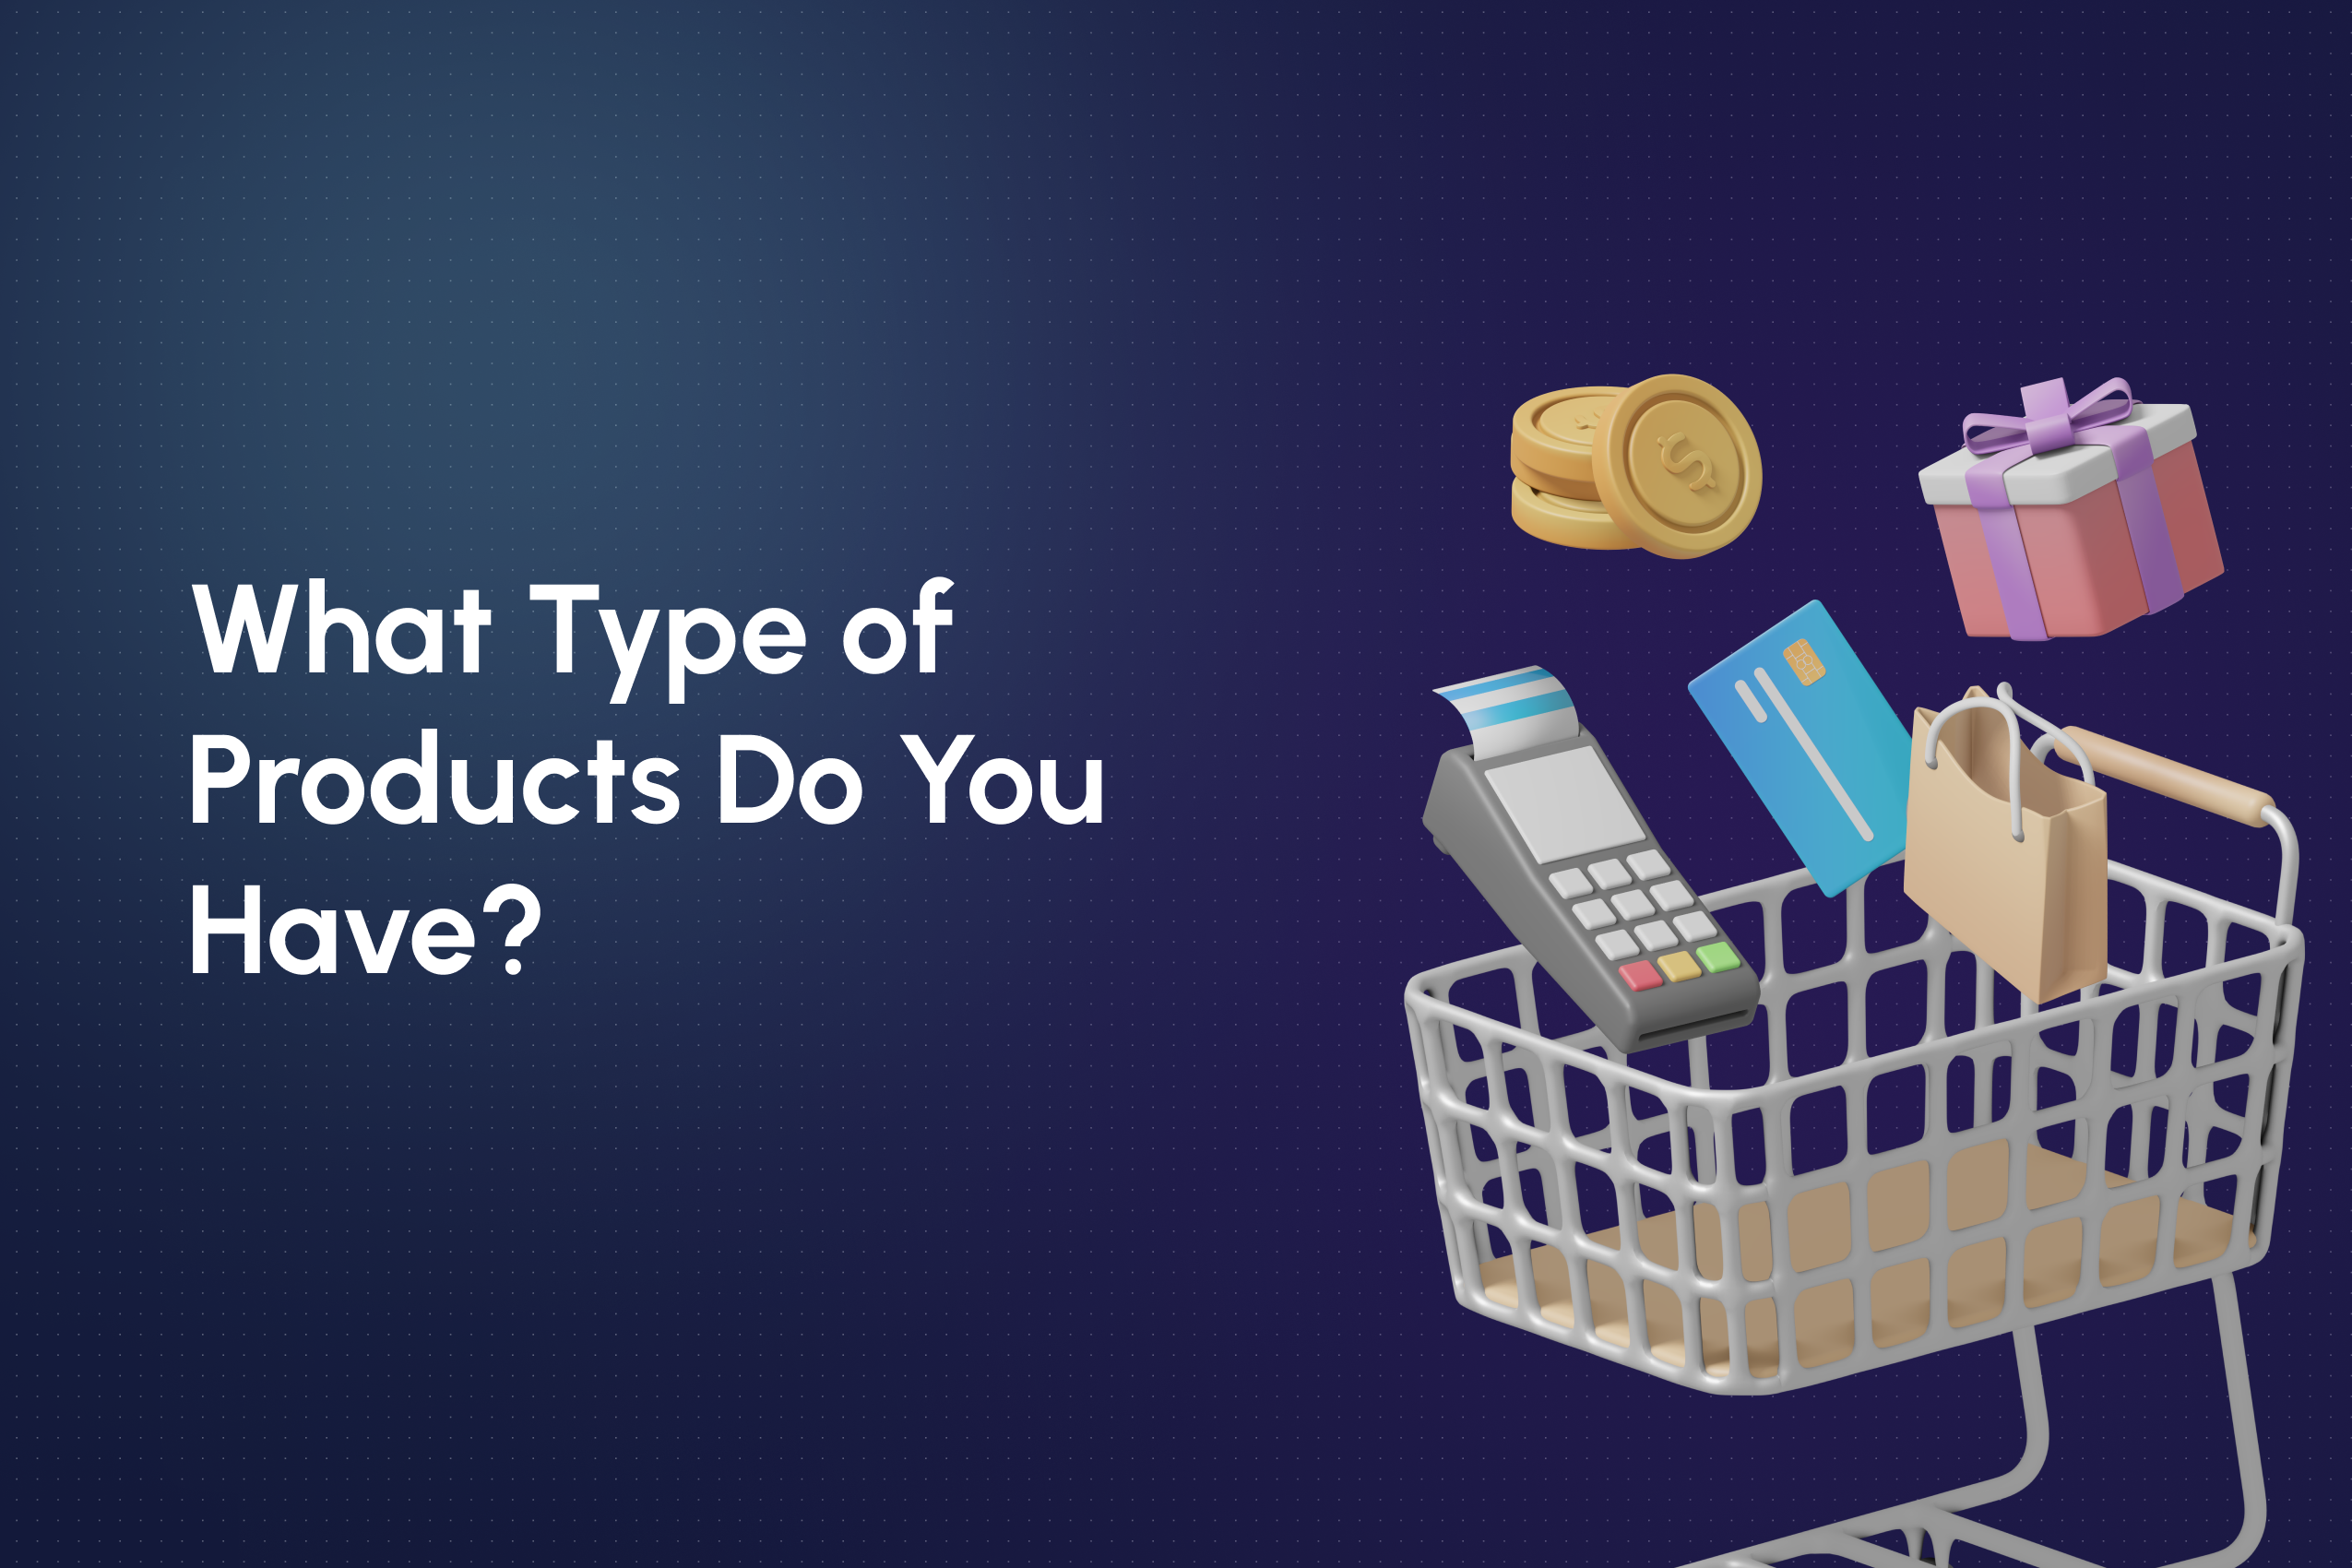 What Type of Products Do You Have?